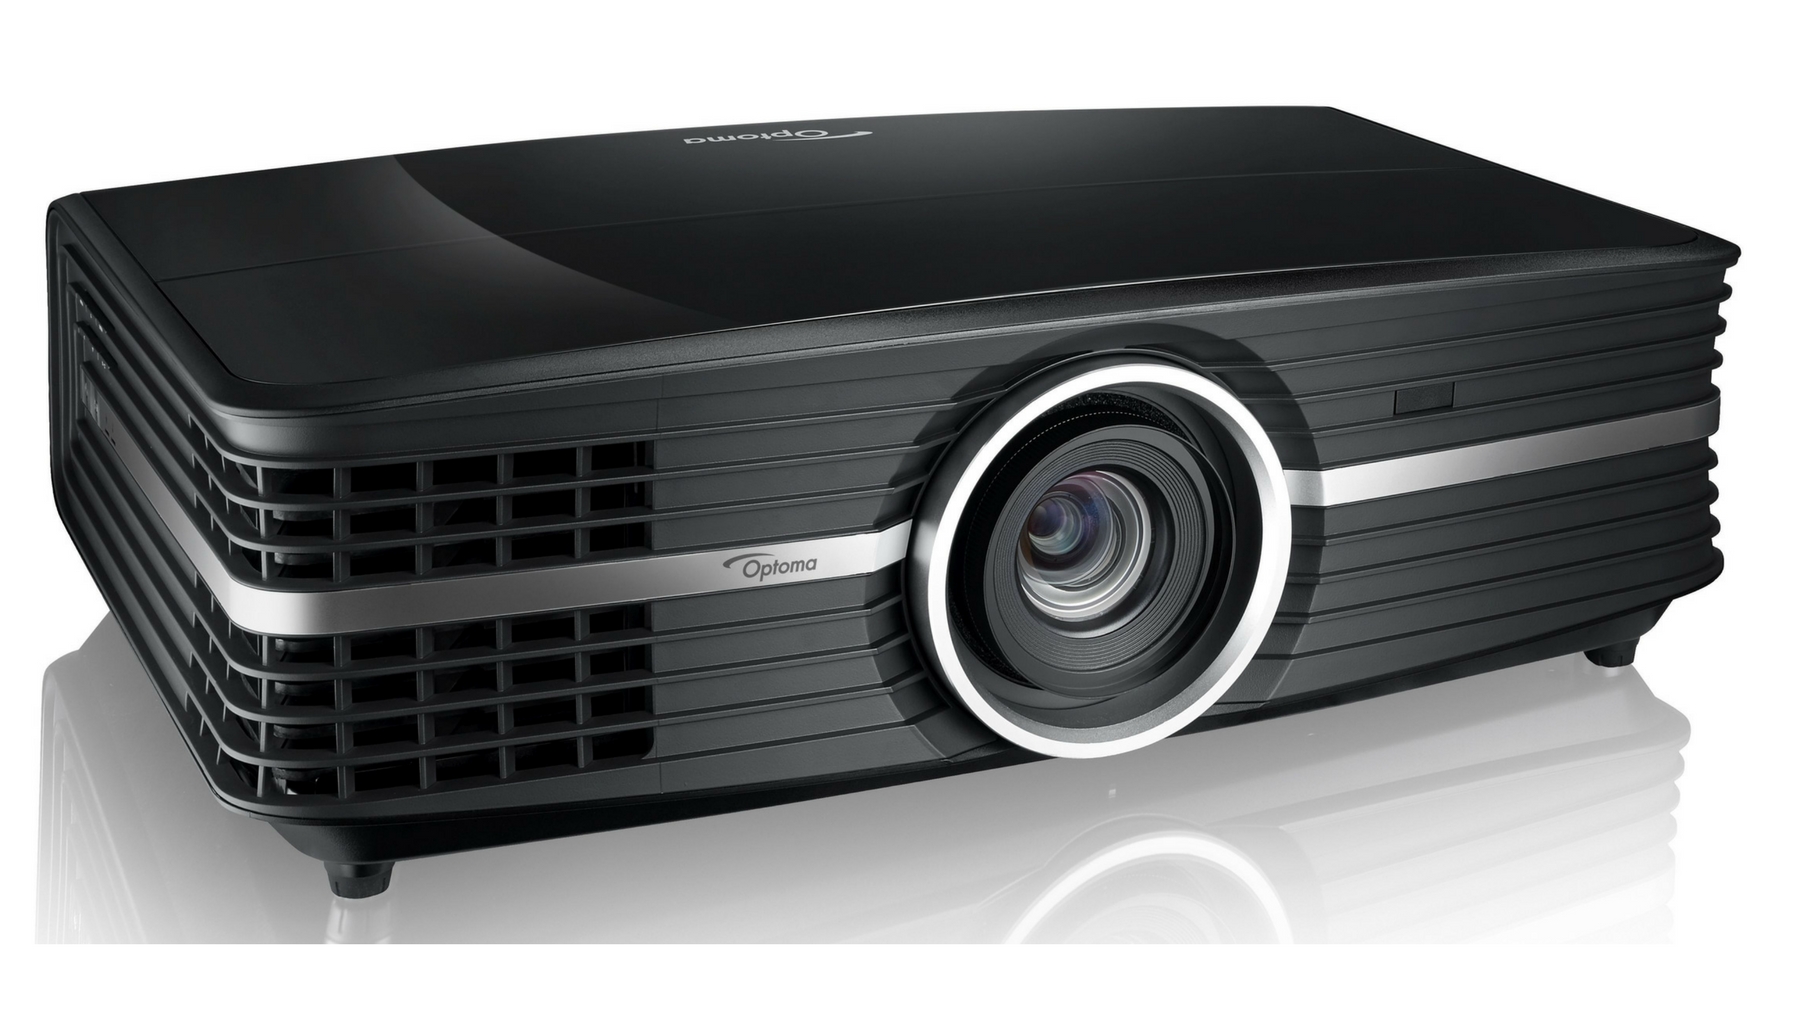 The best projectors 2019: 8 projectors to consider for your home cinema 11